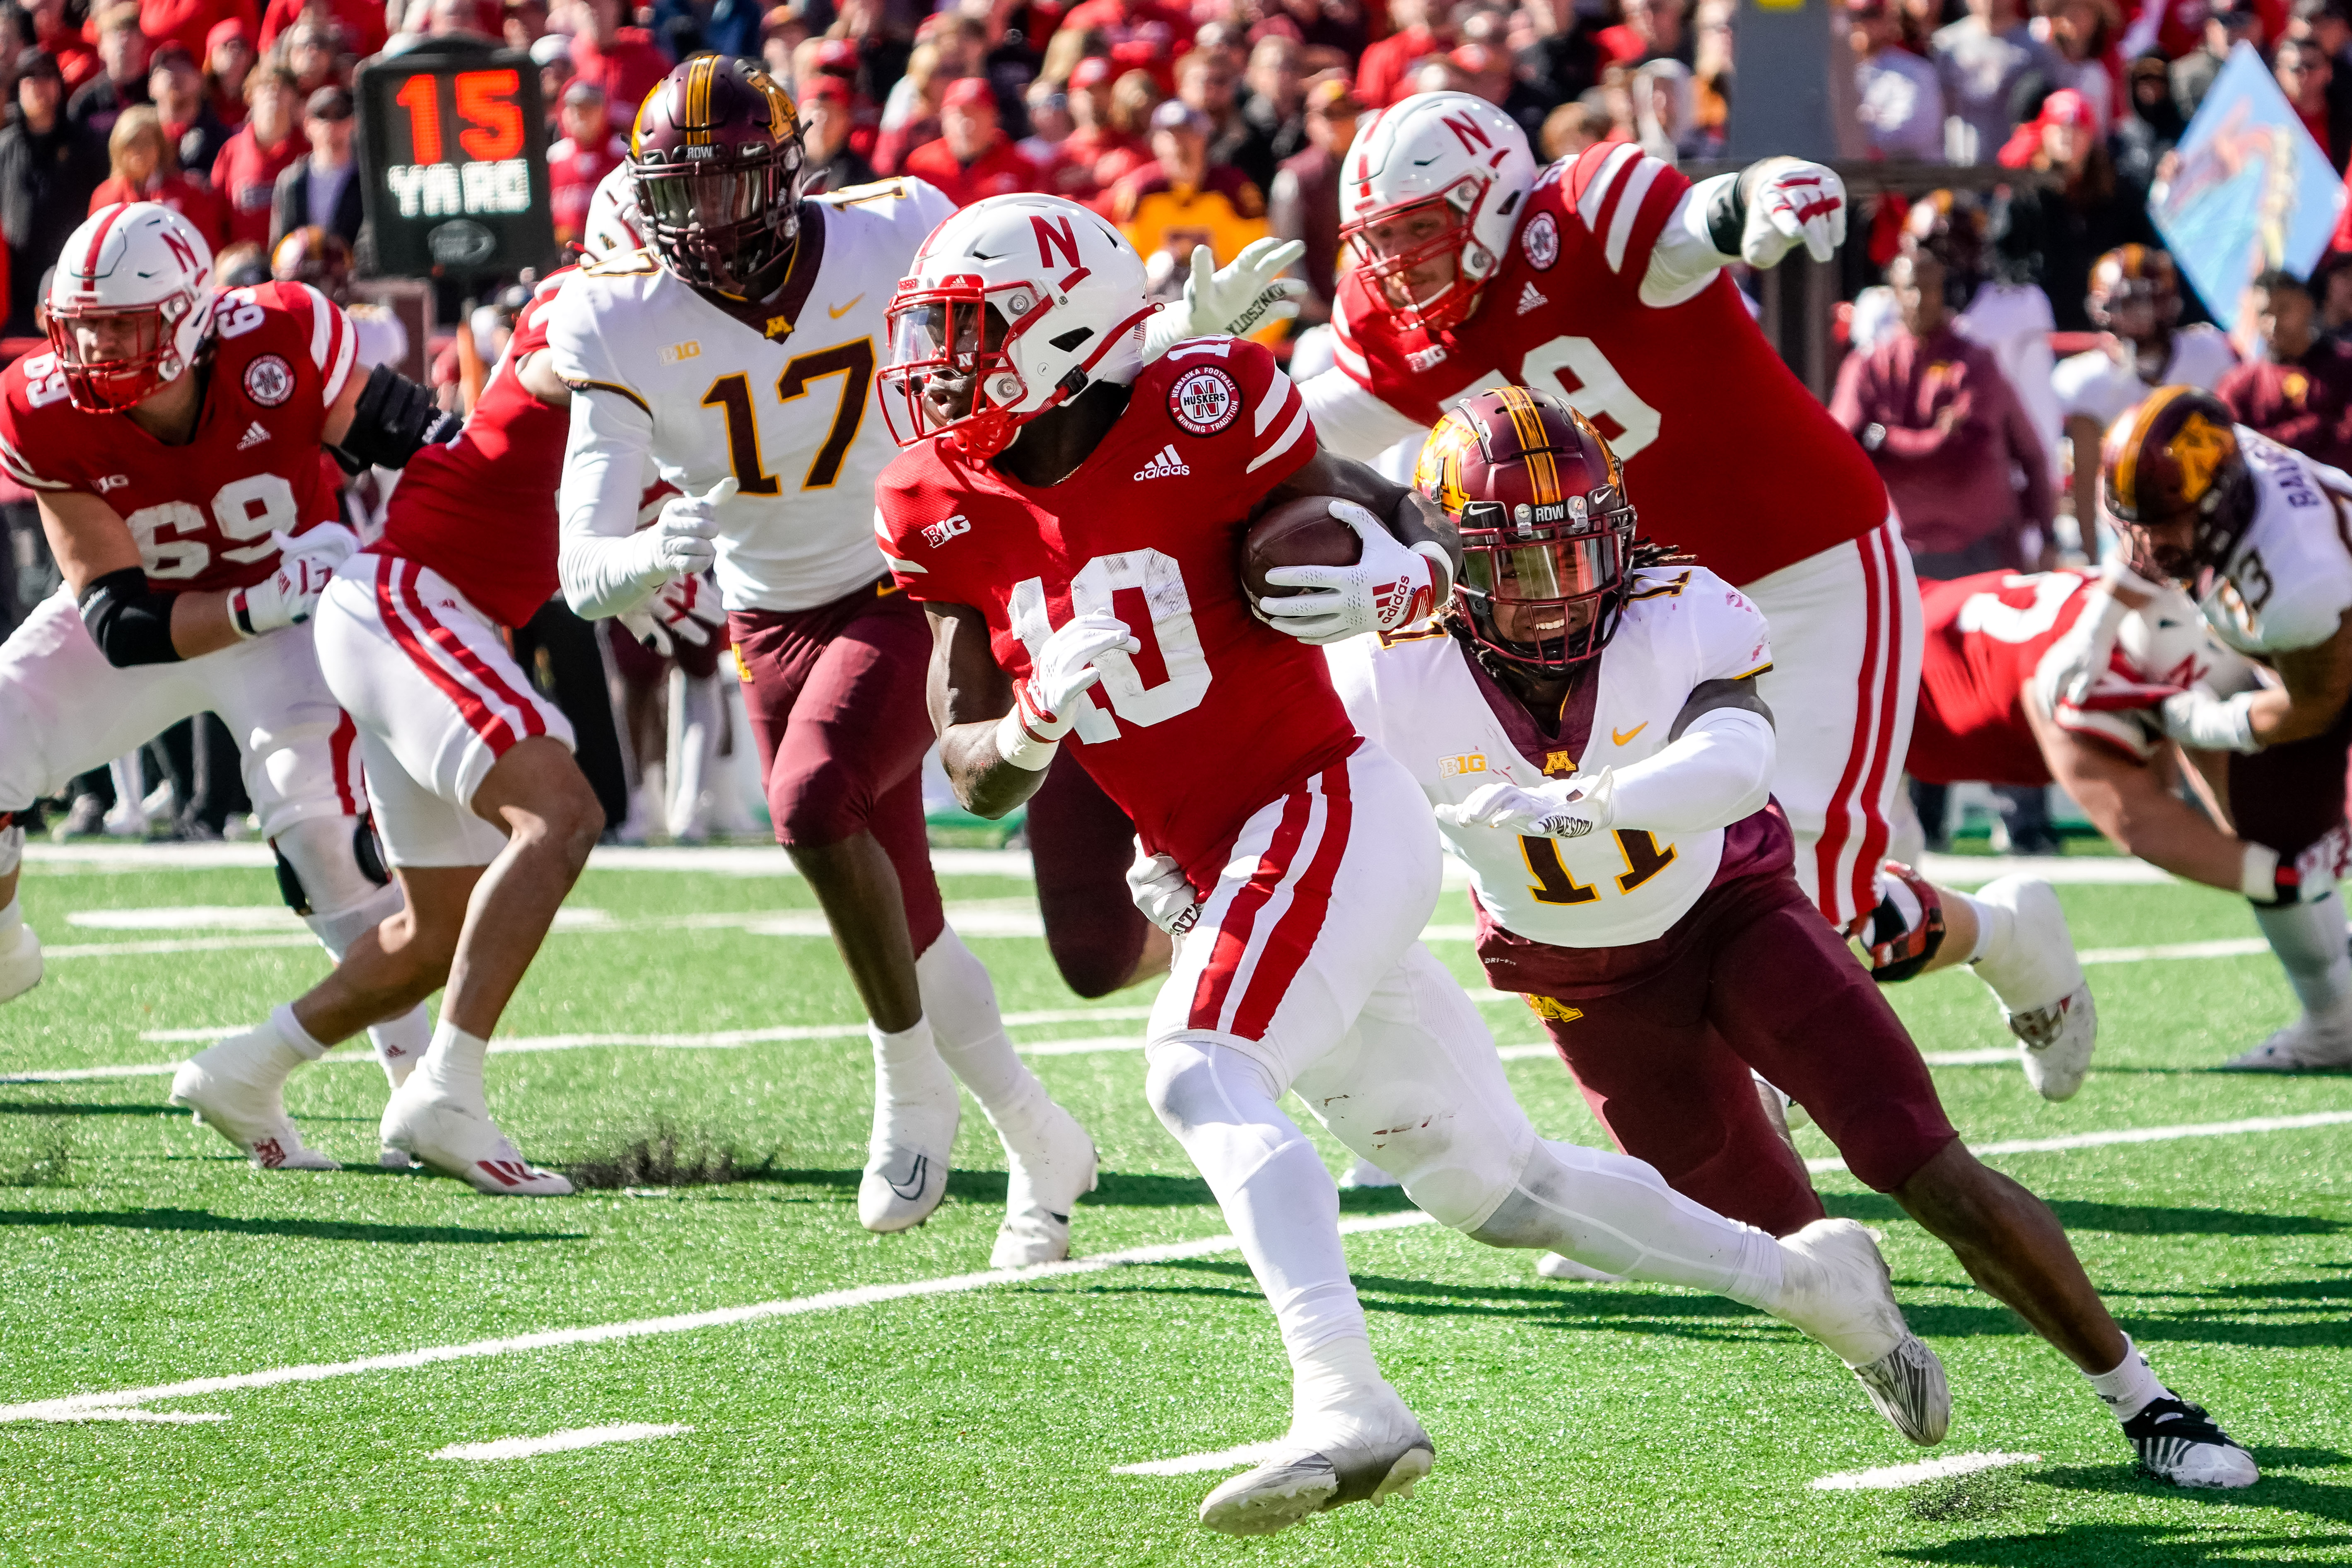 Nebraska Cornhuskers running back Anthony Grant (10) runs with the ball as Minnesota Golden Gophers defensive back Michael Dixon (11) attempts a tackle during the fourth quarter at Memorial Stadium.